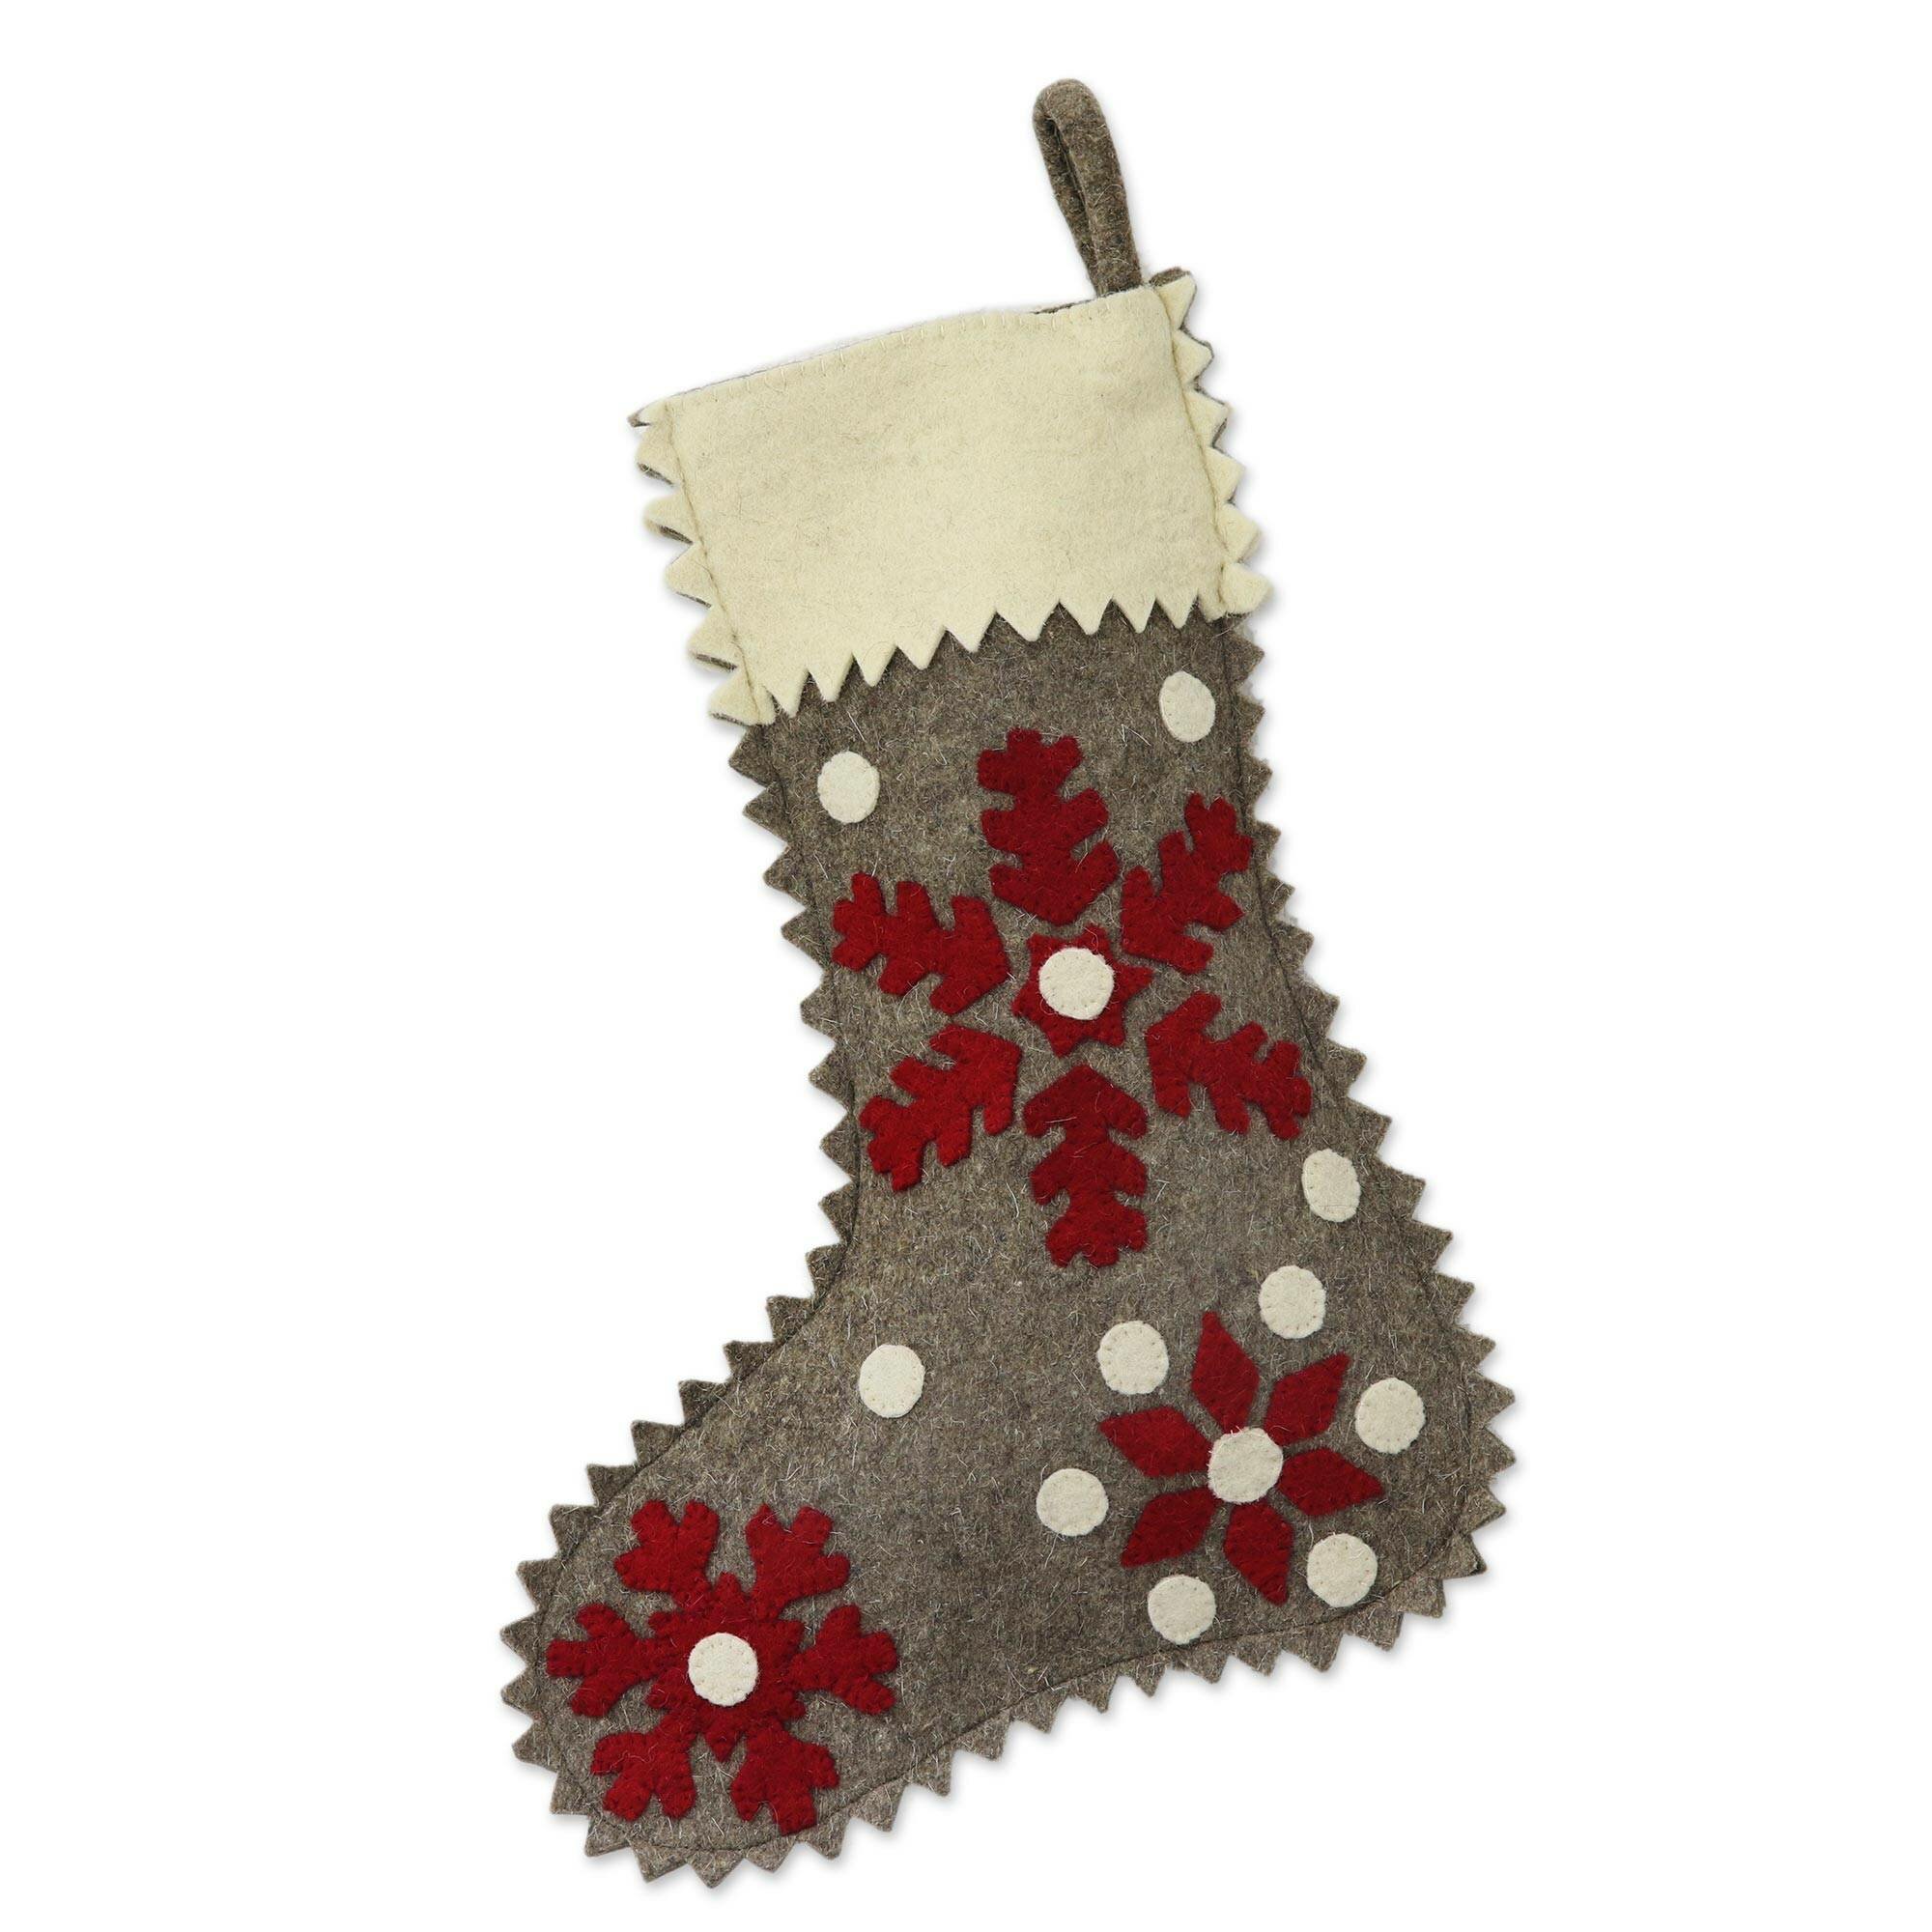 Bells Red Felt Personalized Christmas Stocking